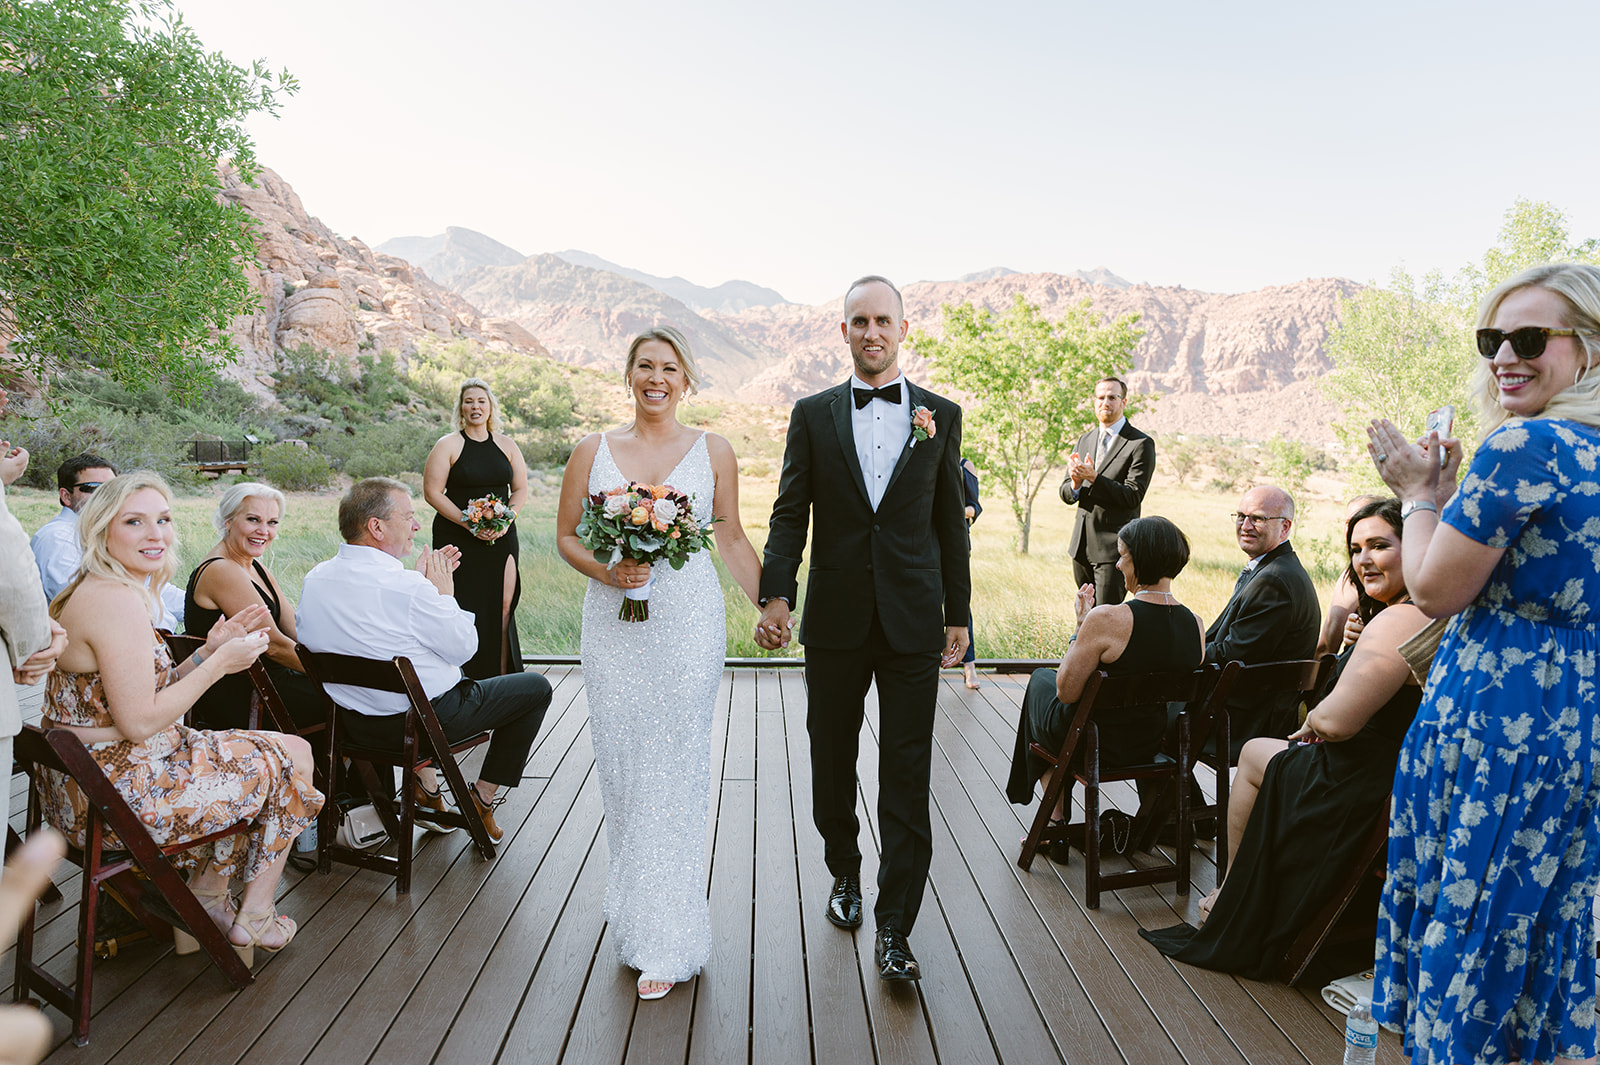 bride and groom walking on Red Rock Boardwalk with Red Rock Canyon backdrop. Bride wearing glittering white dress.